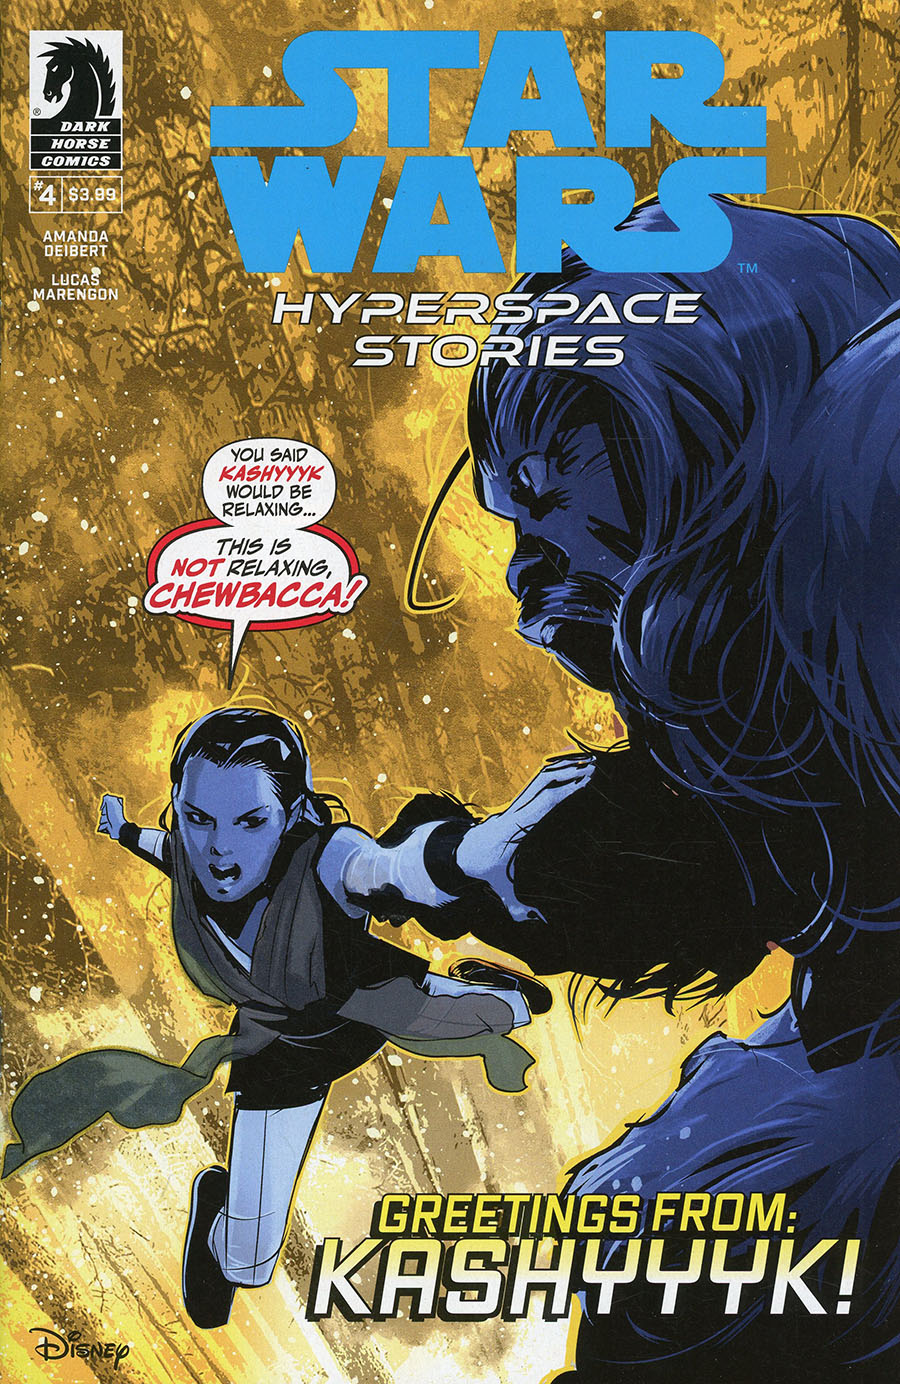 Hyperspace Stories #4 (Cover B by Cary Nord) (01.02.2023)